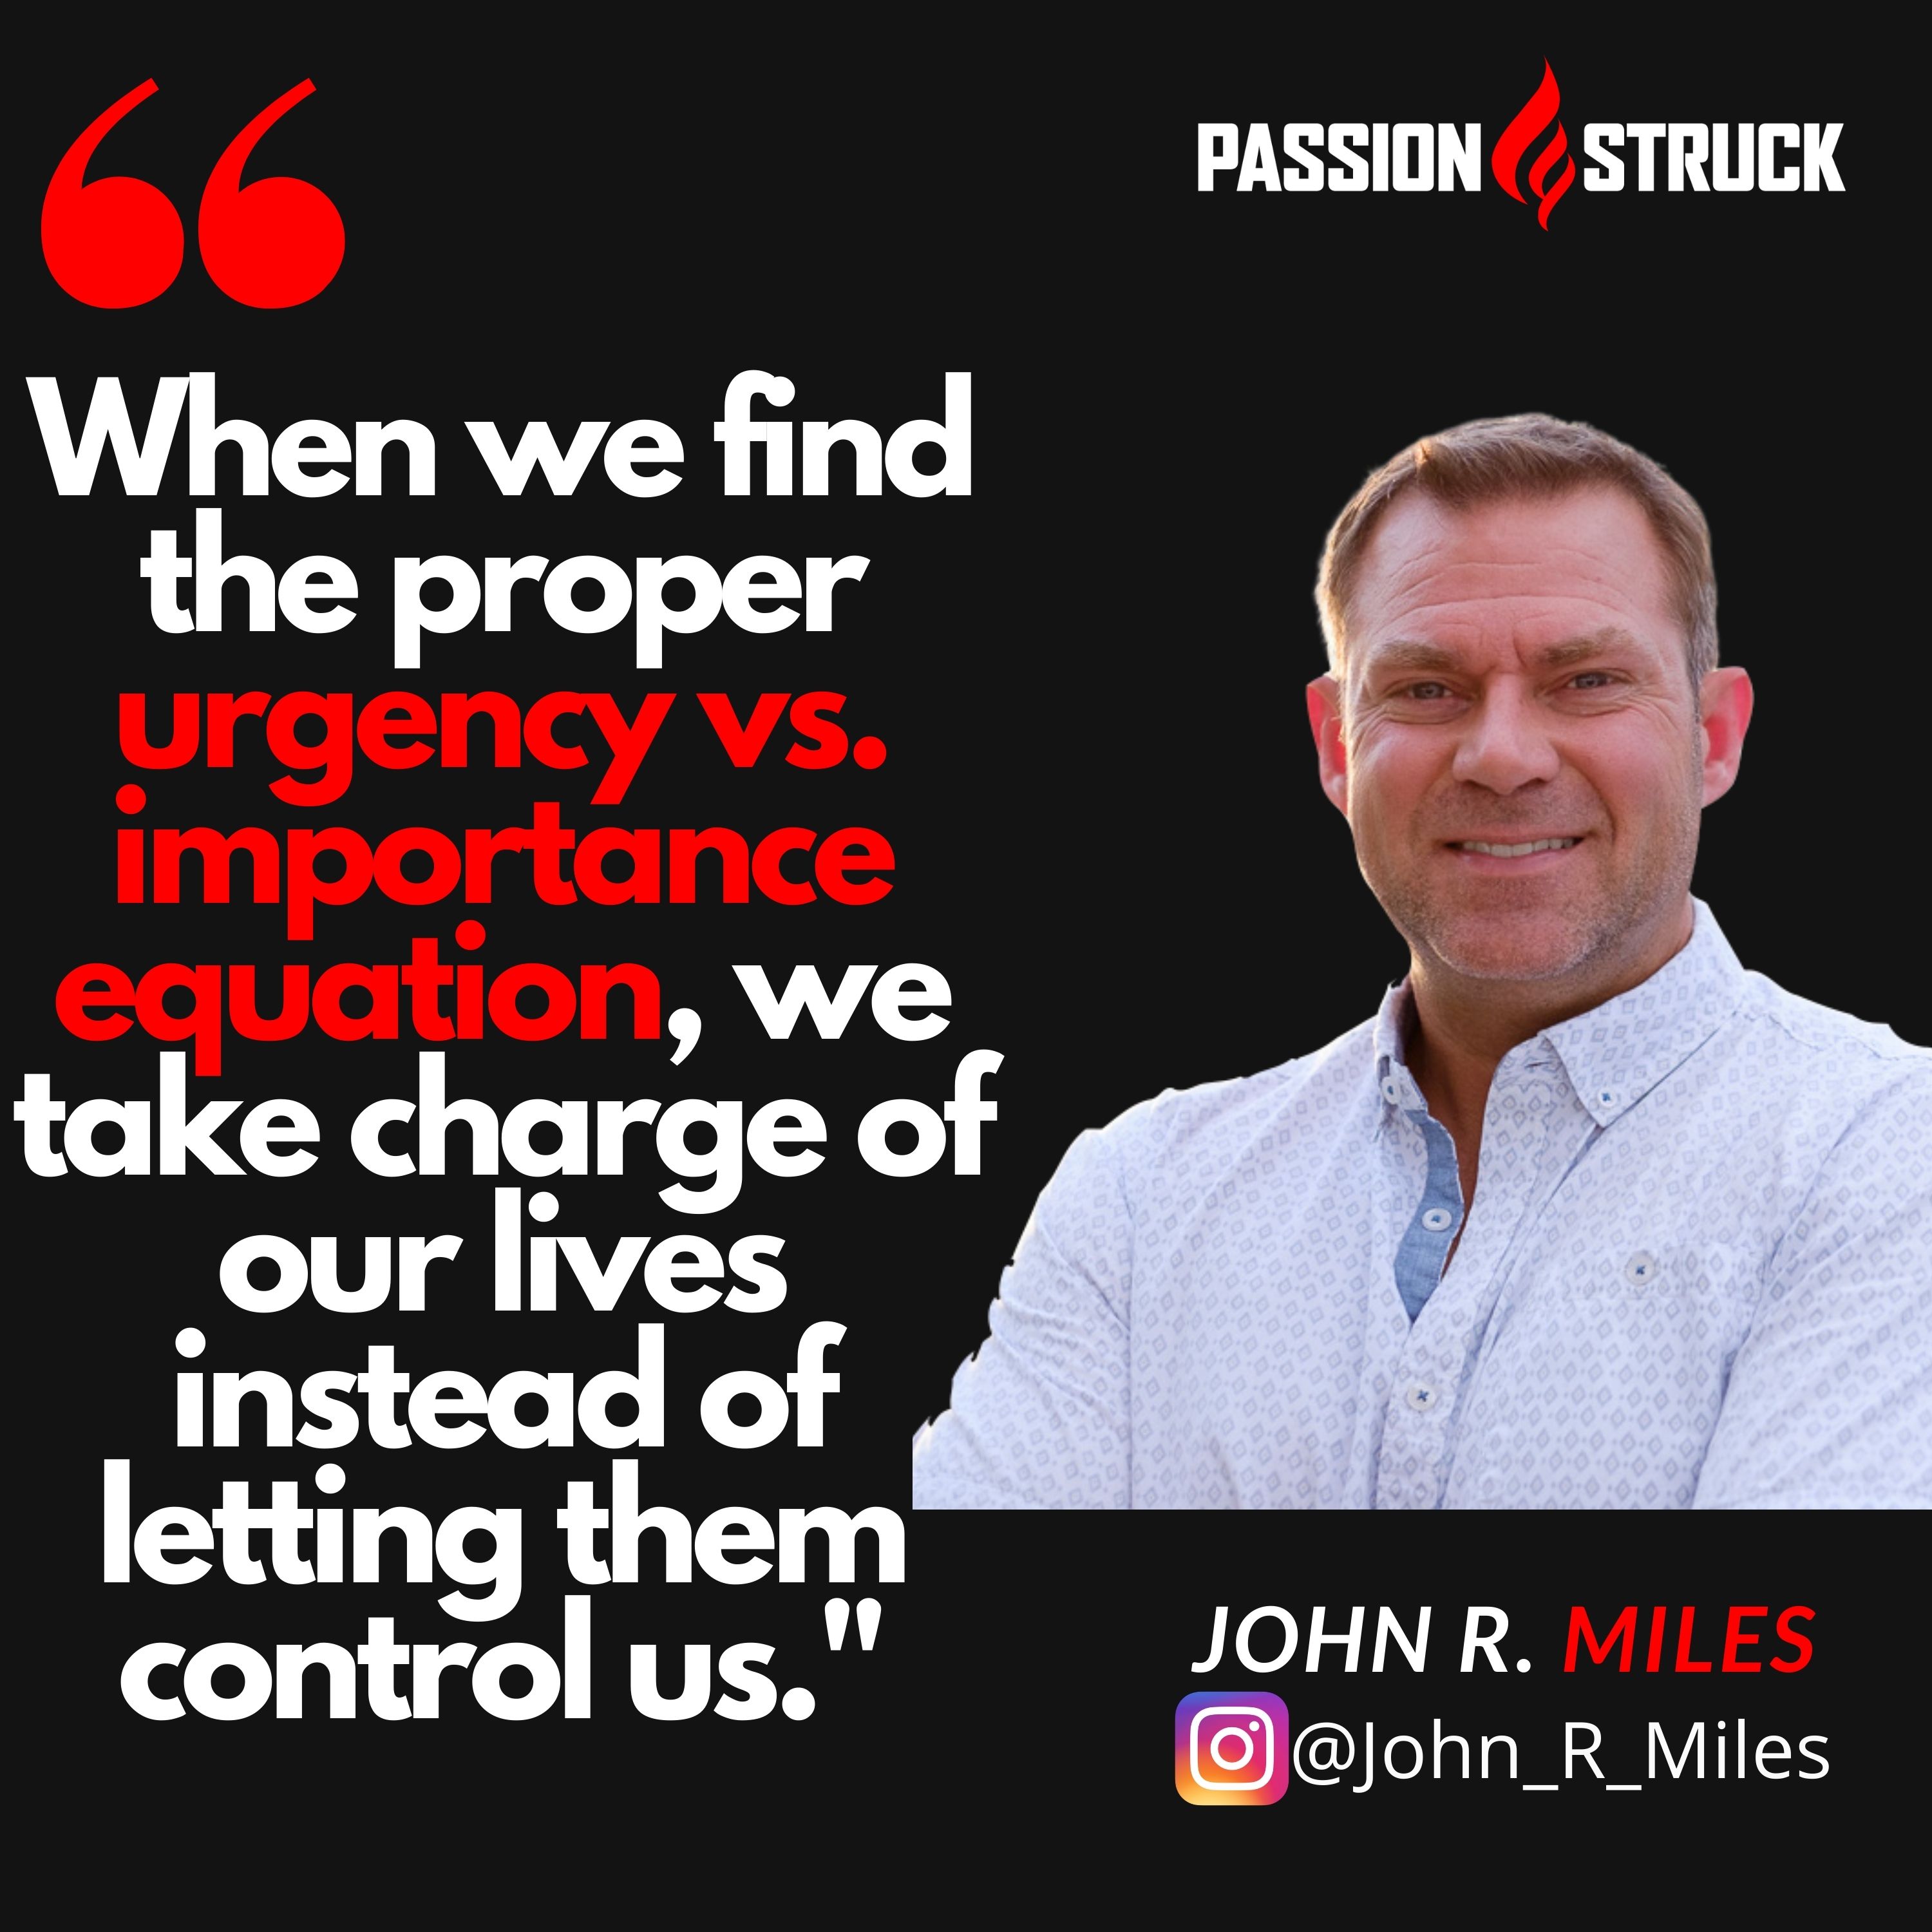 Quote by John R. Miles about work life balance: When we find the proper urgency vs. importance equation, we take charge of our lives instead of letting them control us.